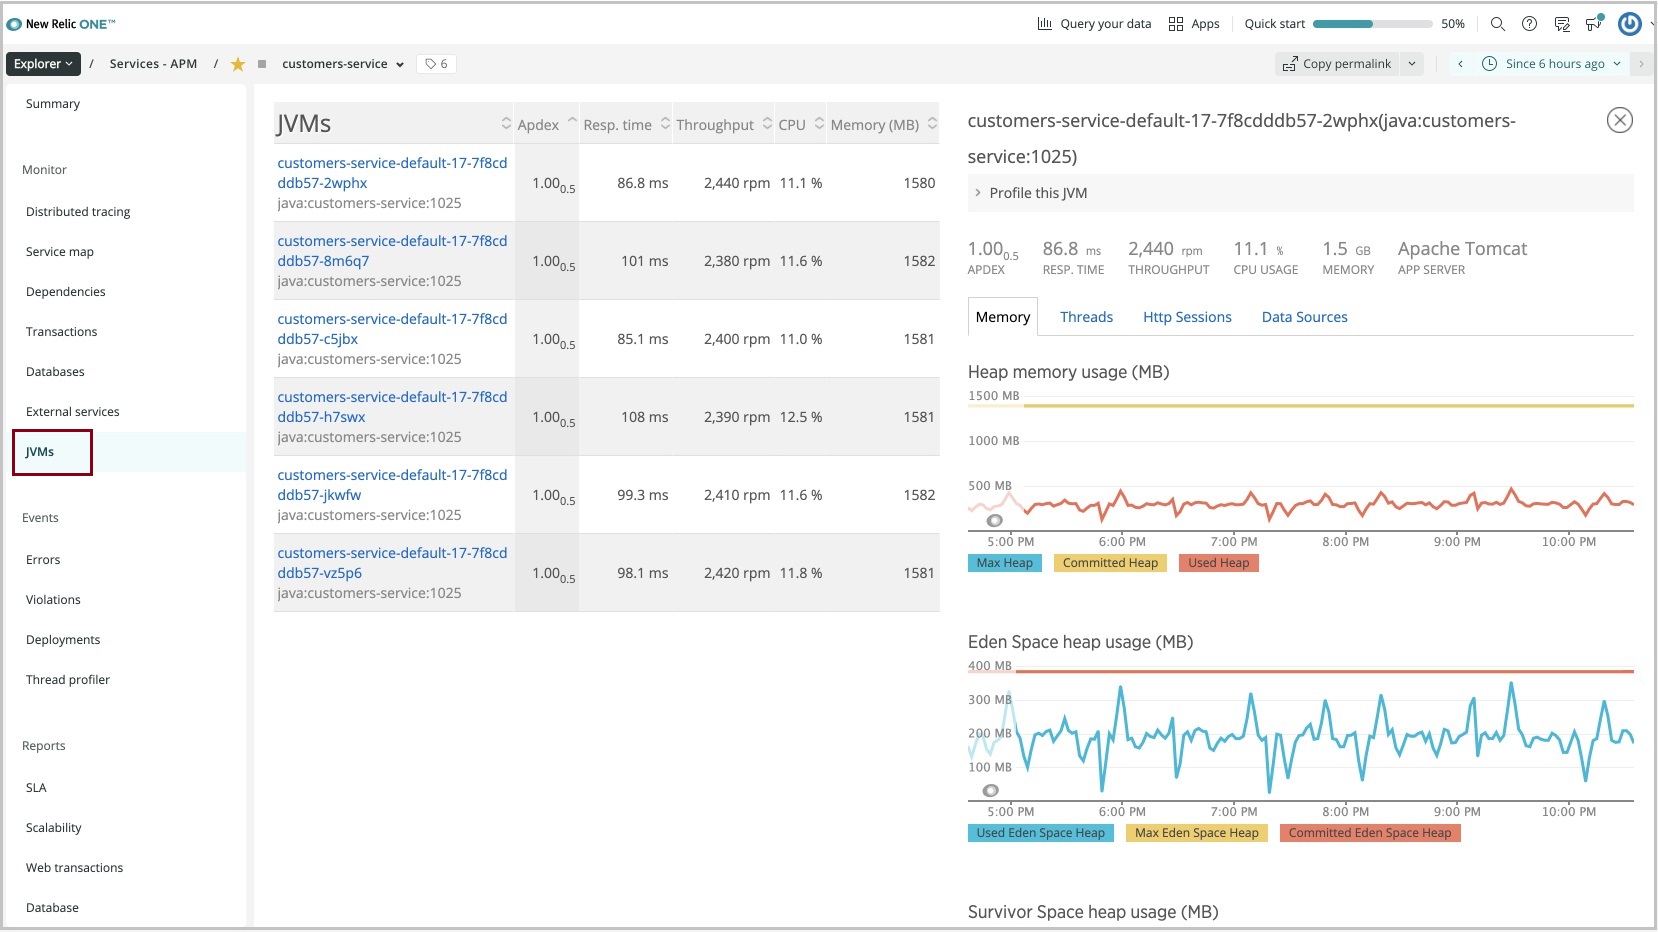 Screenshot of the New Relic dashboard showing the JVM page.